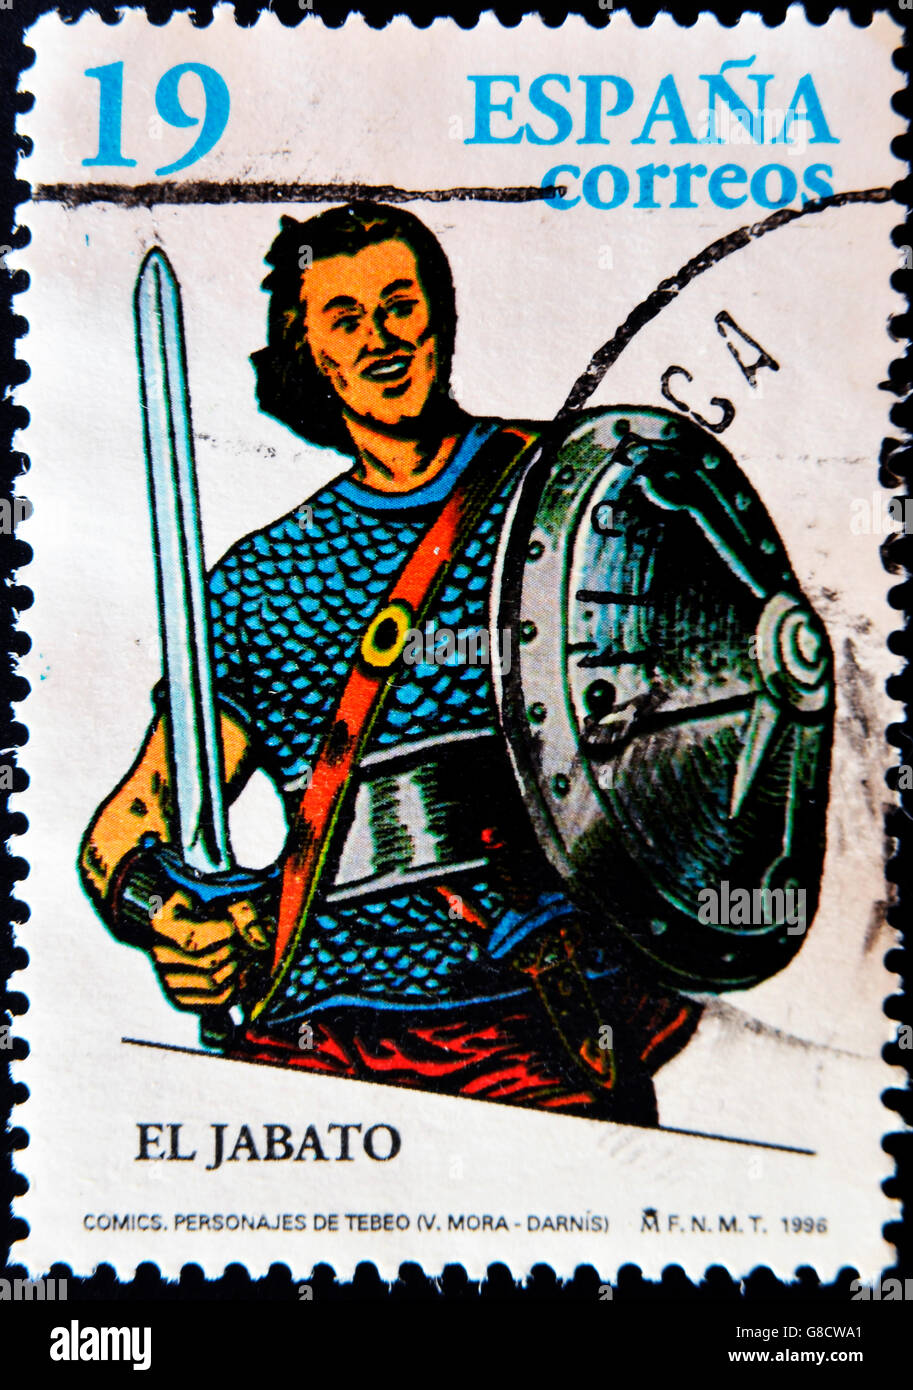 SPAIN - CIRCA 1996: A stamp printed in Spain shows The Jabato, comic book character, circa 1996 Stock Photo